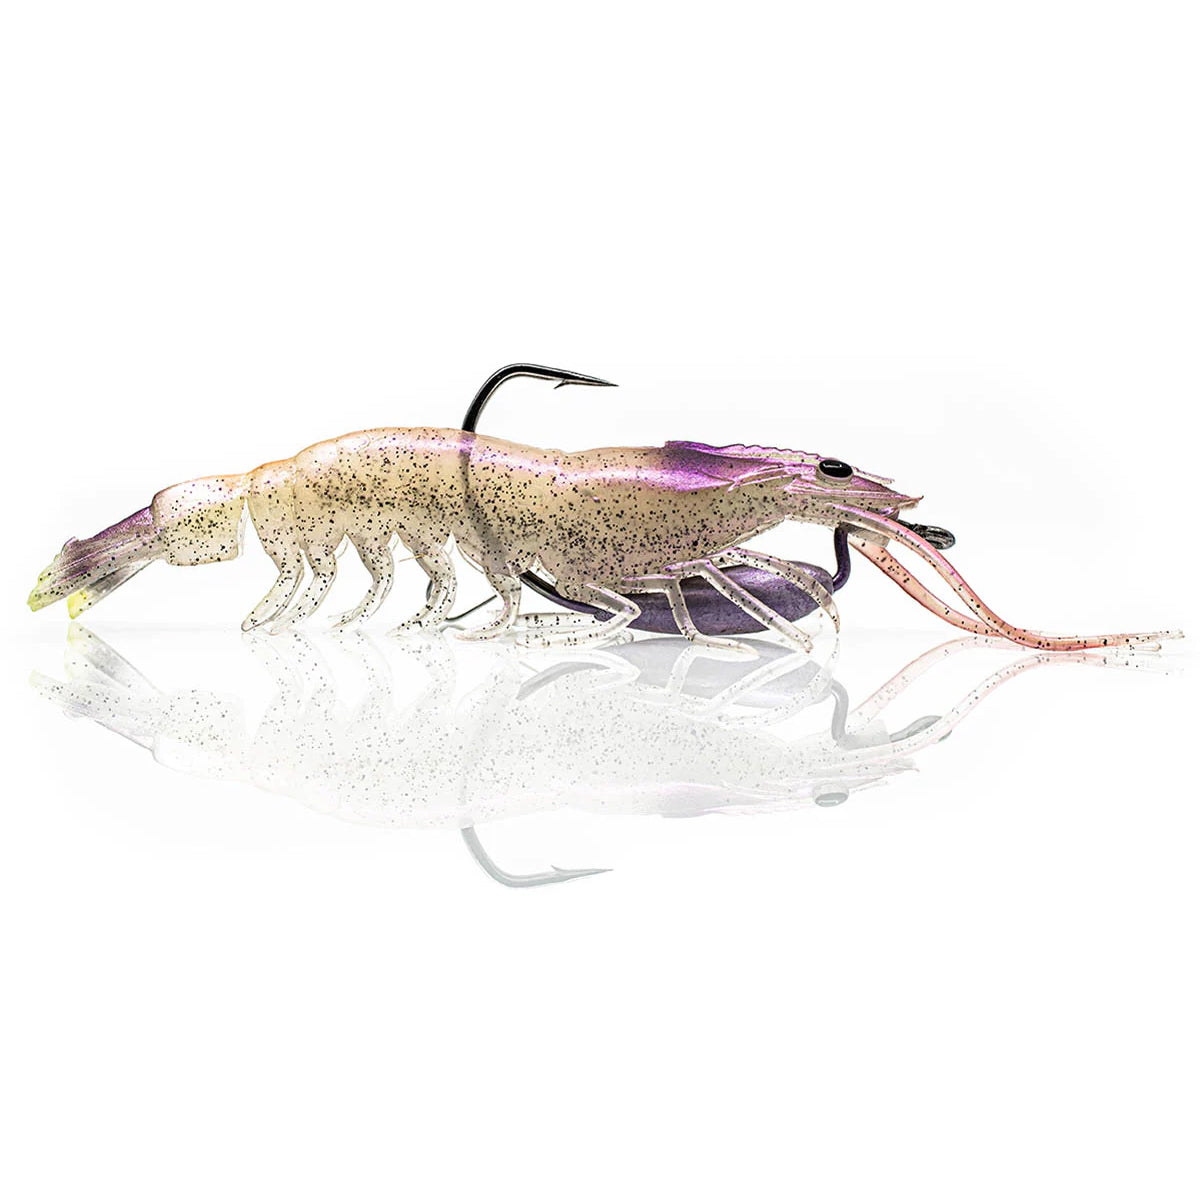 Chasebaits Lures - Compleat Angler Nedlands Pro Tackle